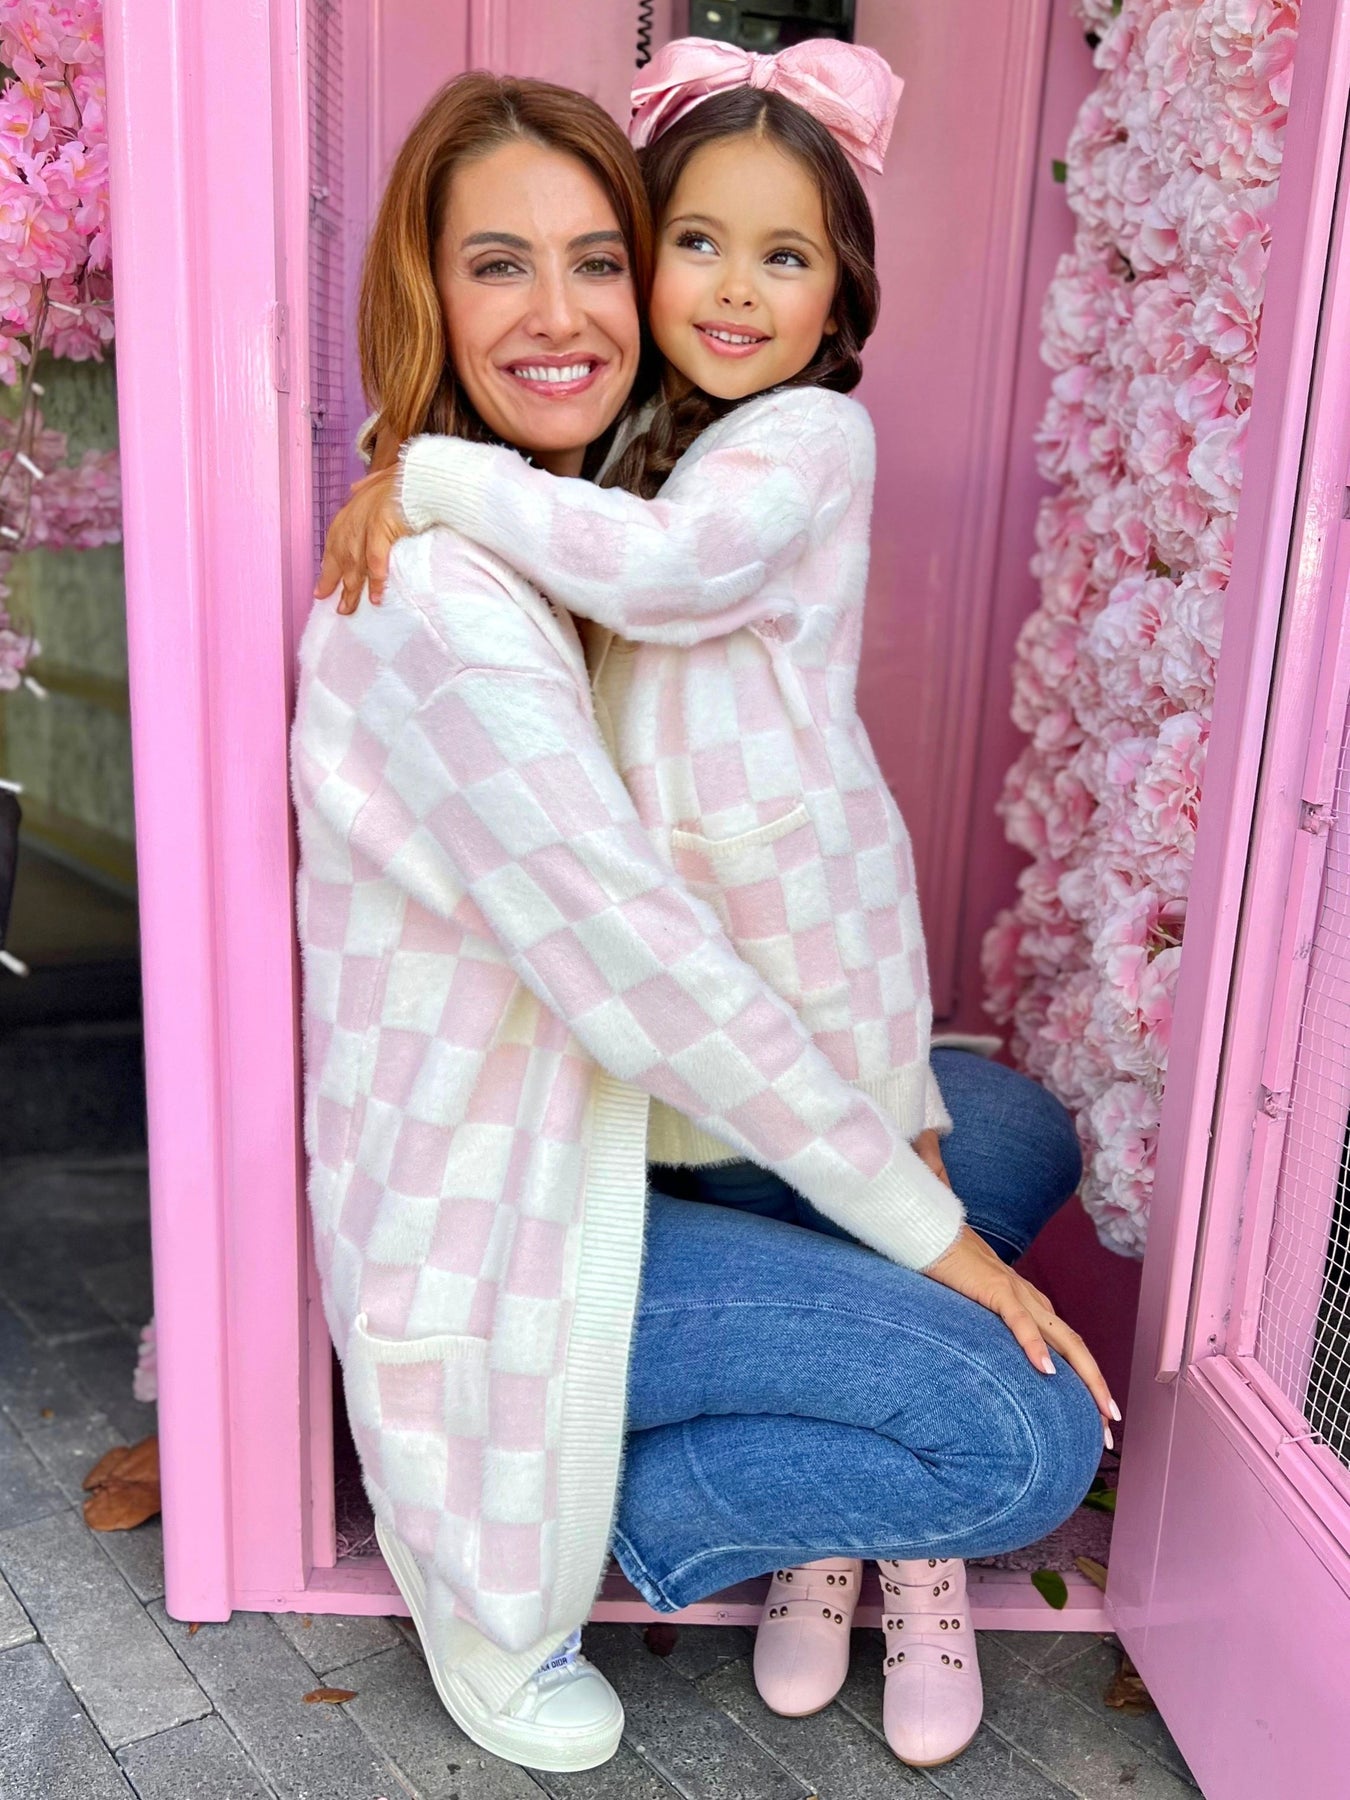 Mia Belle Girls Pink Checkered Open Cardigan | Mommy & Me Outfits